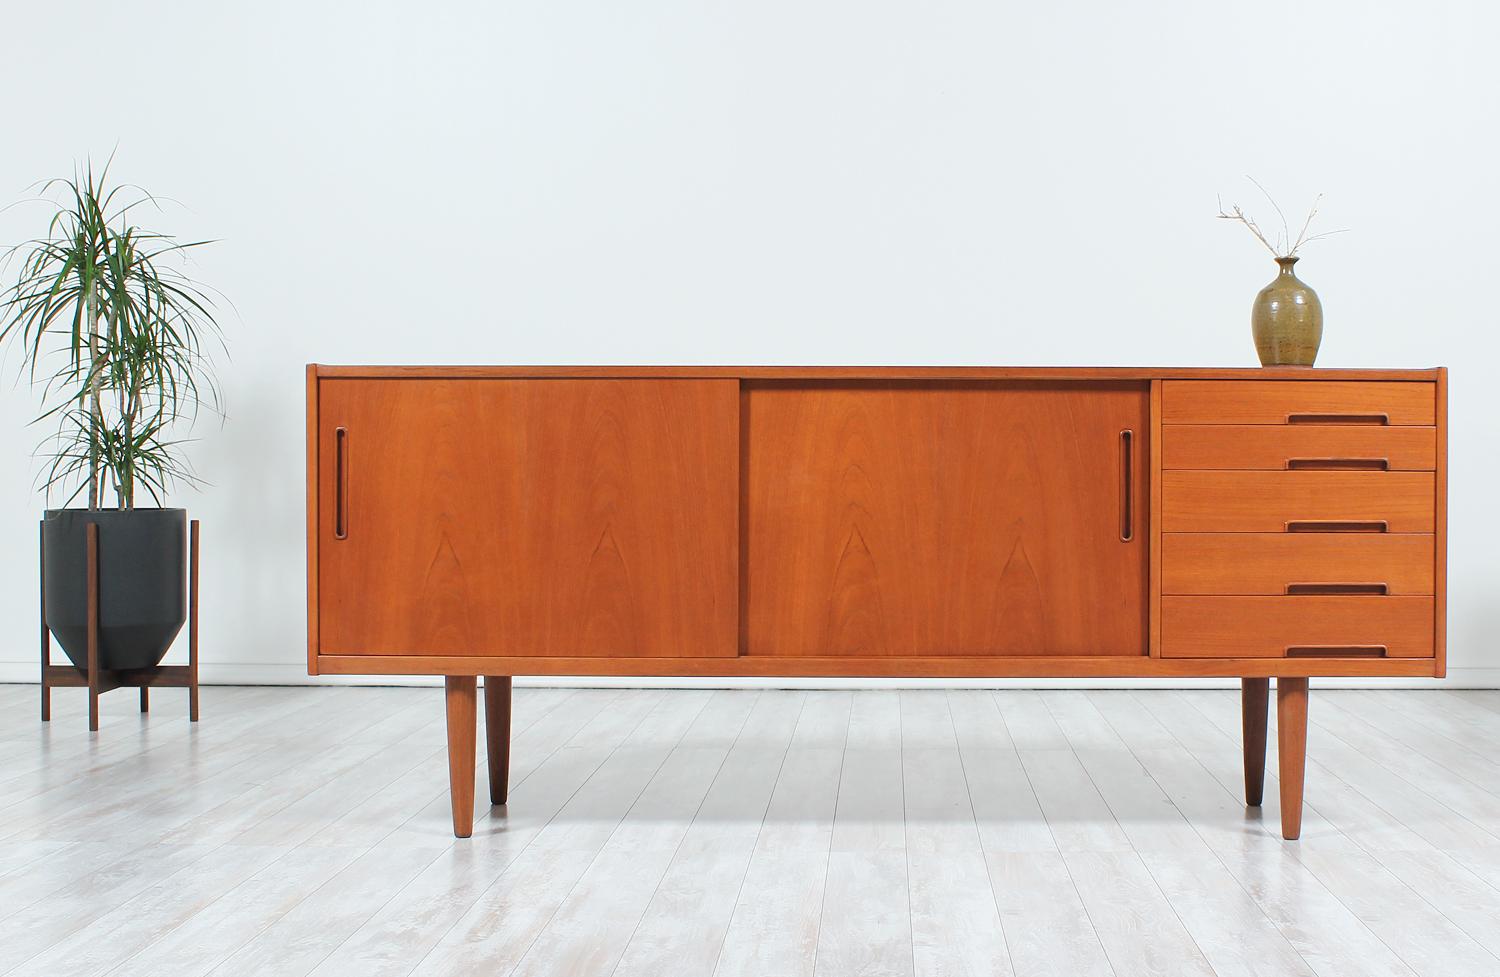 Gorgeous “Trento” credenza designed by Nils Jonsson for Hugo Troeds in Denmark circa 1960s. This clean design has been quality crafted in teak wood and features two sliding doors on the left side with two shelved compartments behind and five